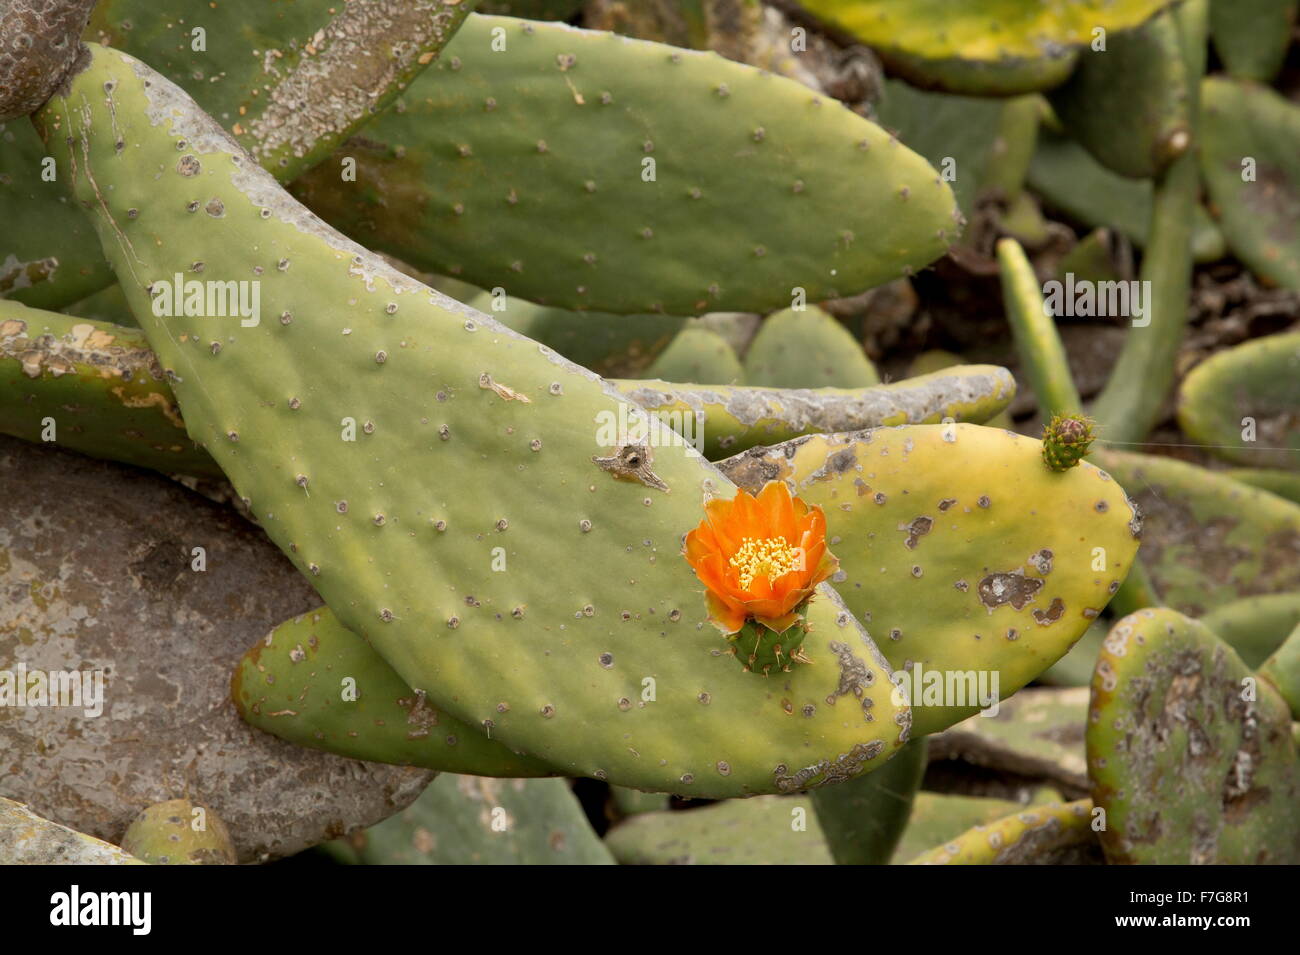 Prickly pear, Opuntia ficus-indica, in cultivation, with flowers; North Lanzarote, primarily for cochineal production. Stock Photo